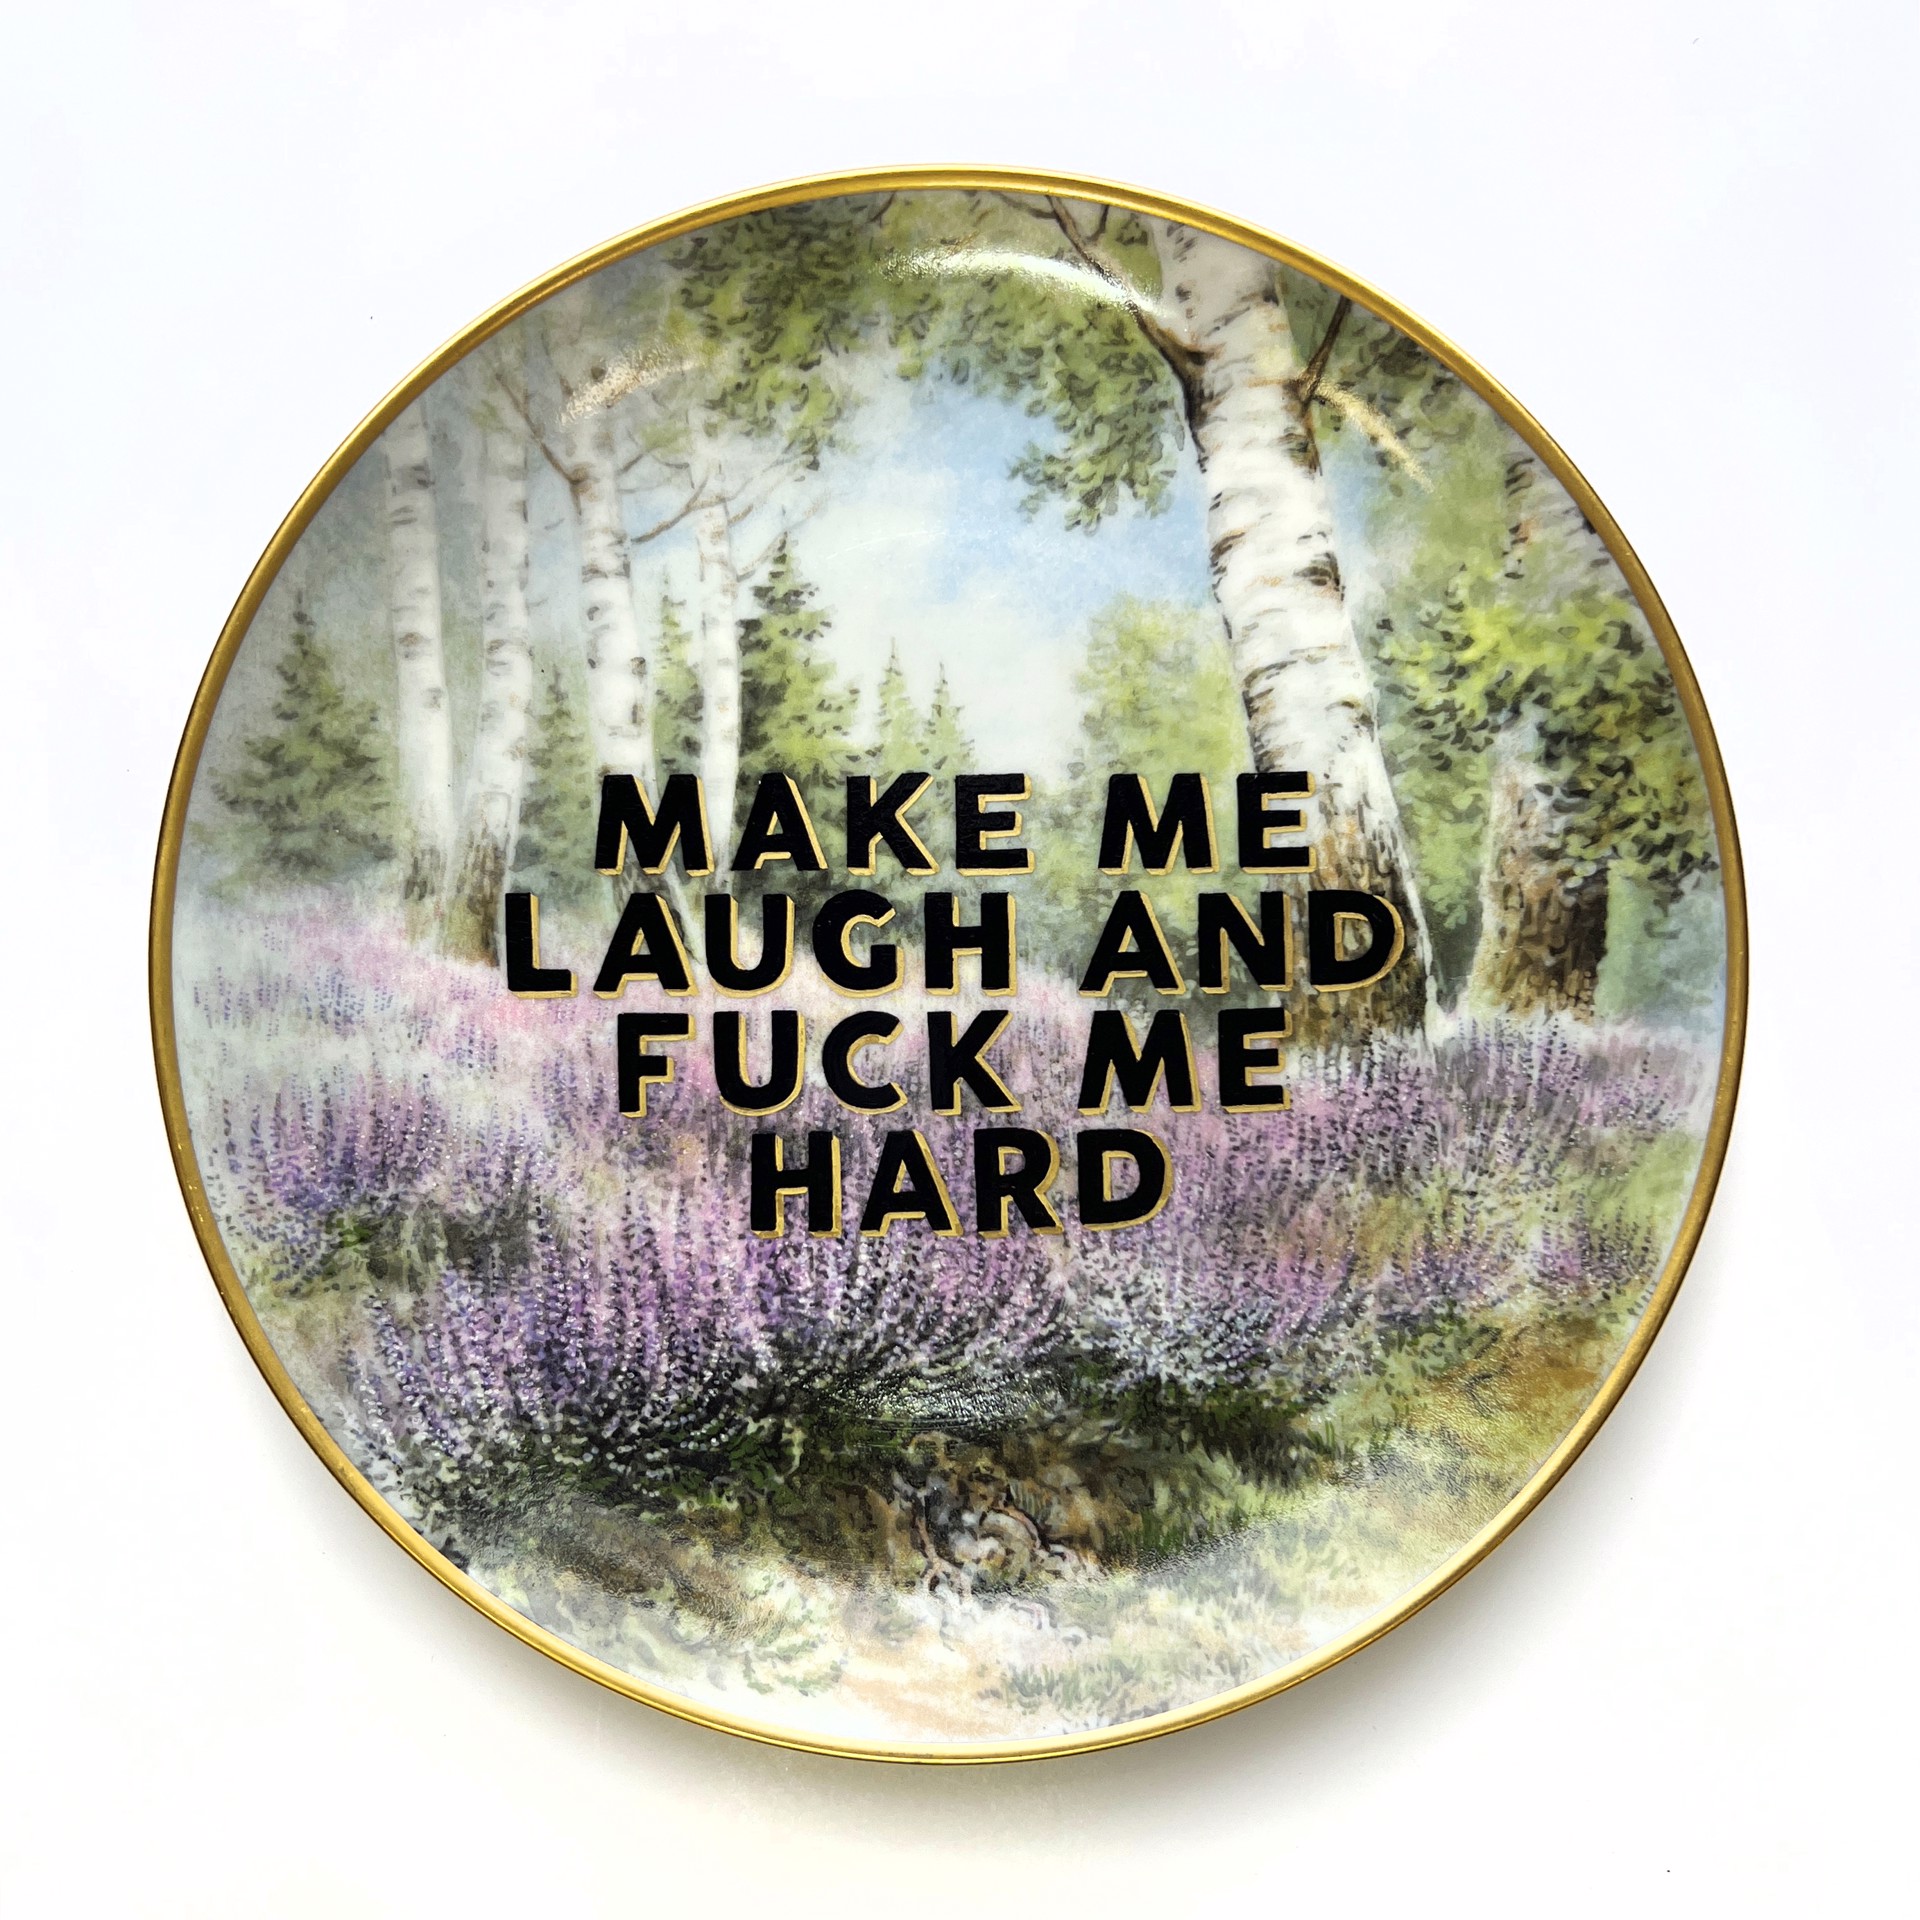 Make me laugh and fuck me hard by Marie-Claude Marquis